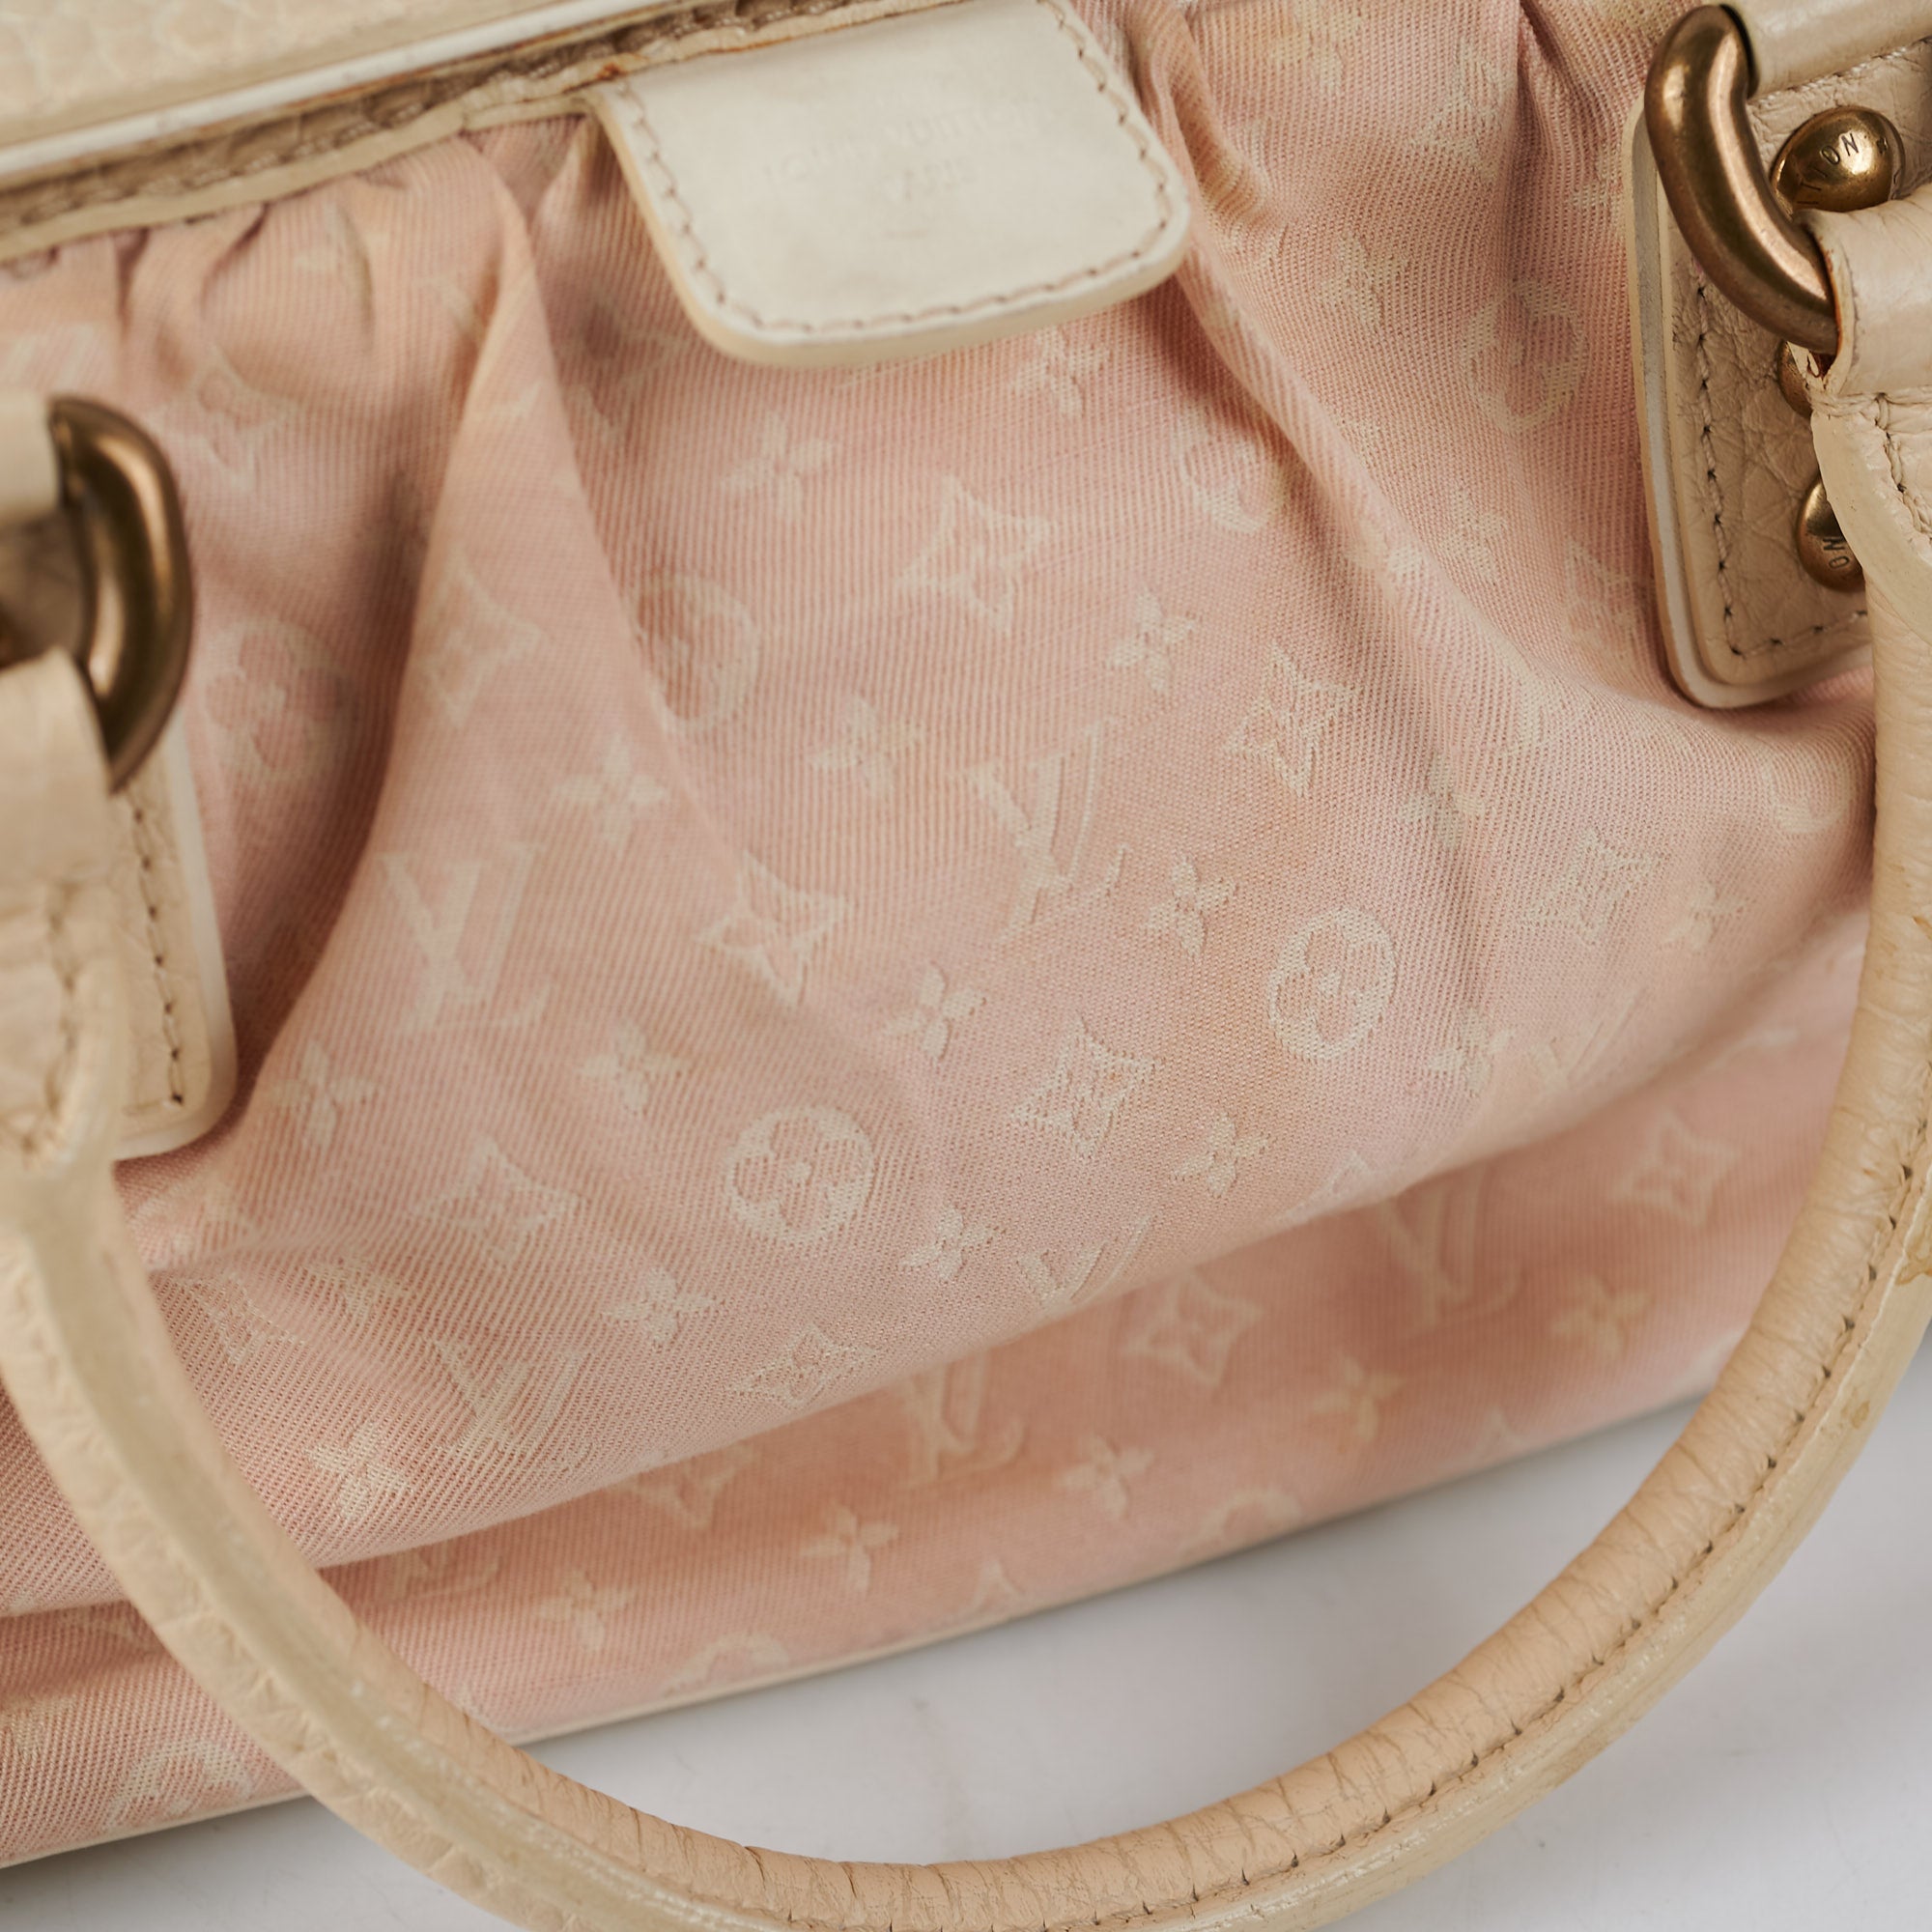 Louis Vuitton Vintage - Mini Lin Trapeze GM Bag - Pink Rose - Canvas and  Leather Handbag - Luxury High Quality